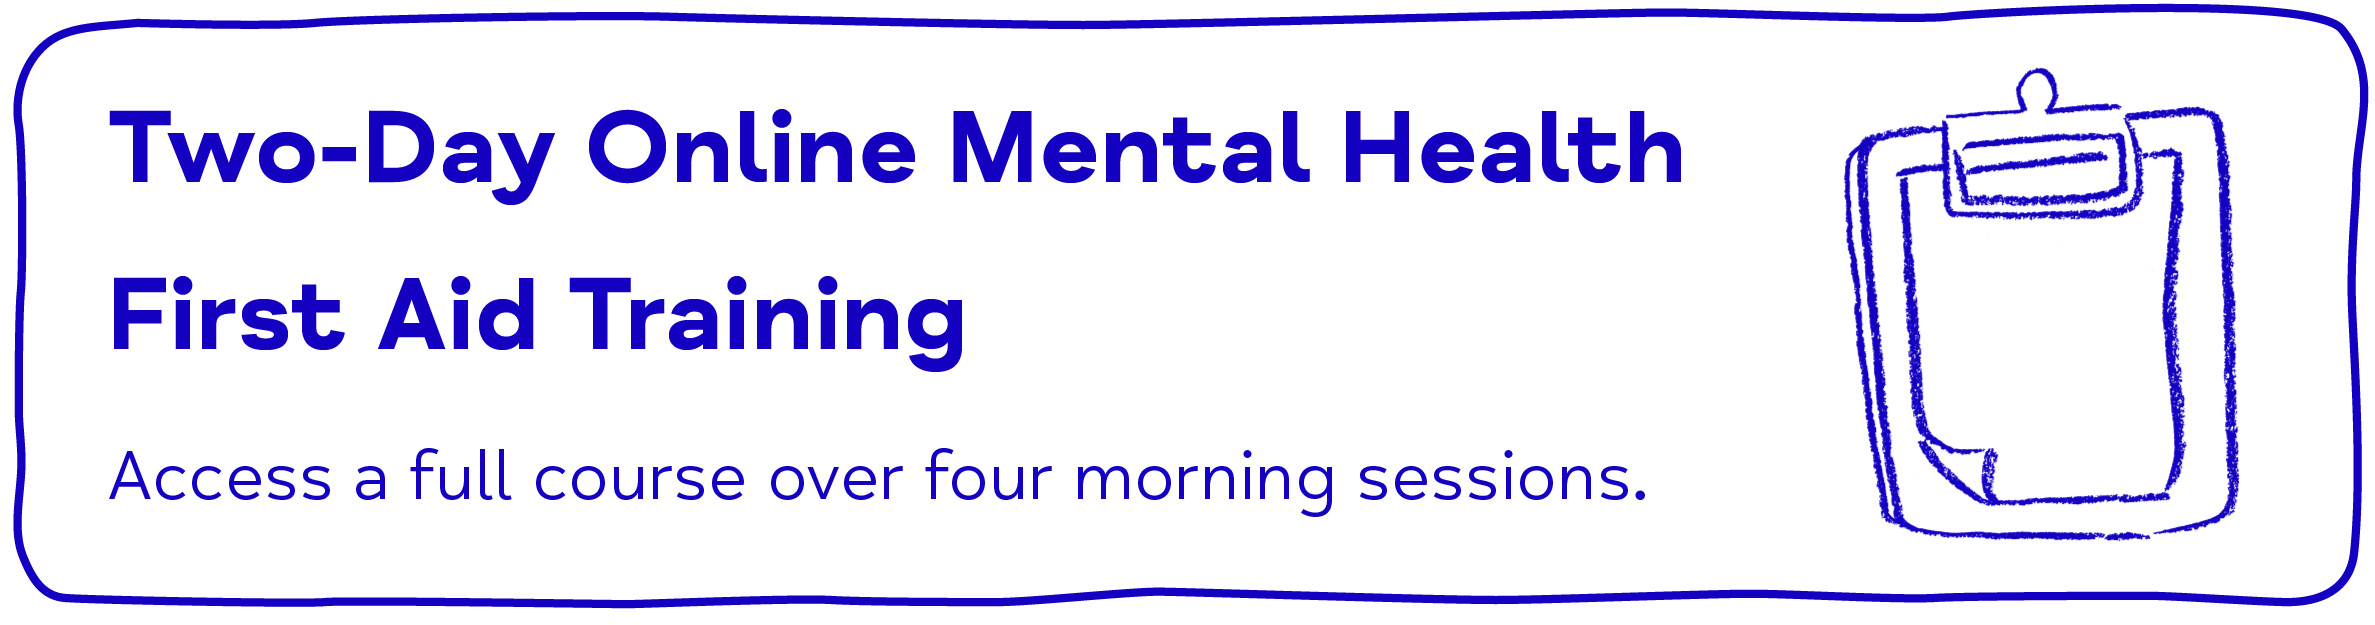 Two-Day Online Mental Health First Aid Training. Access a full course over four morning sessions.